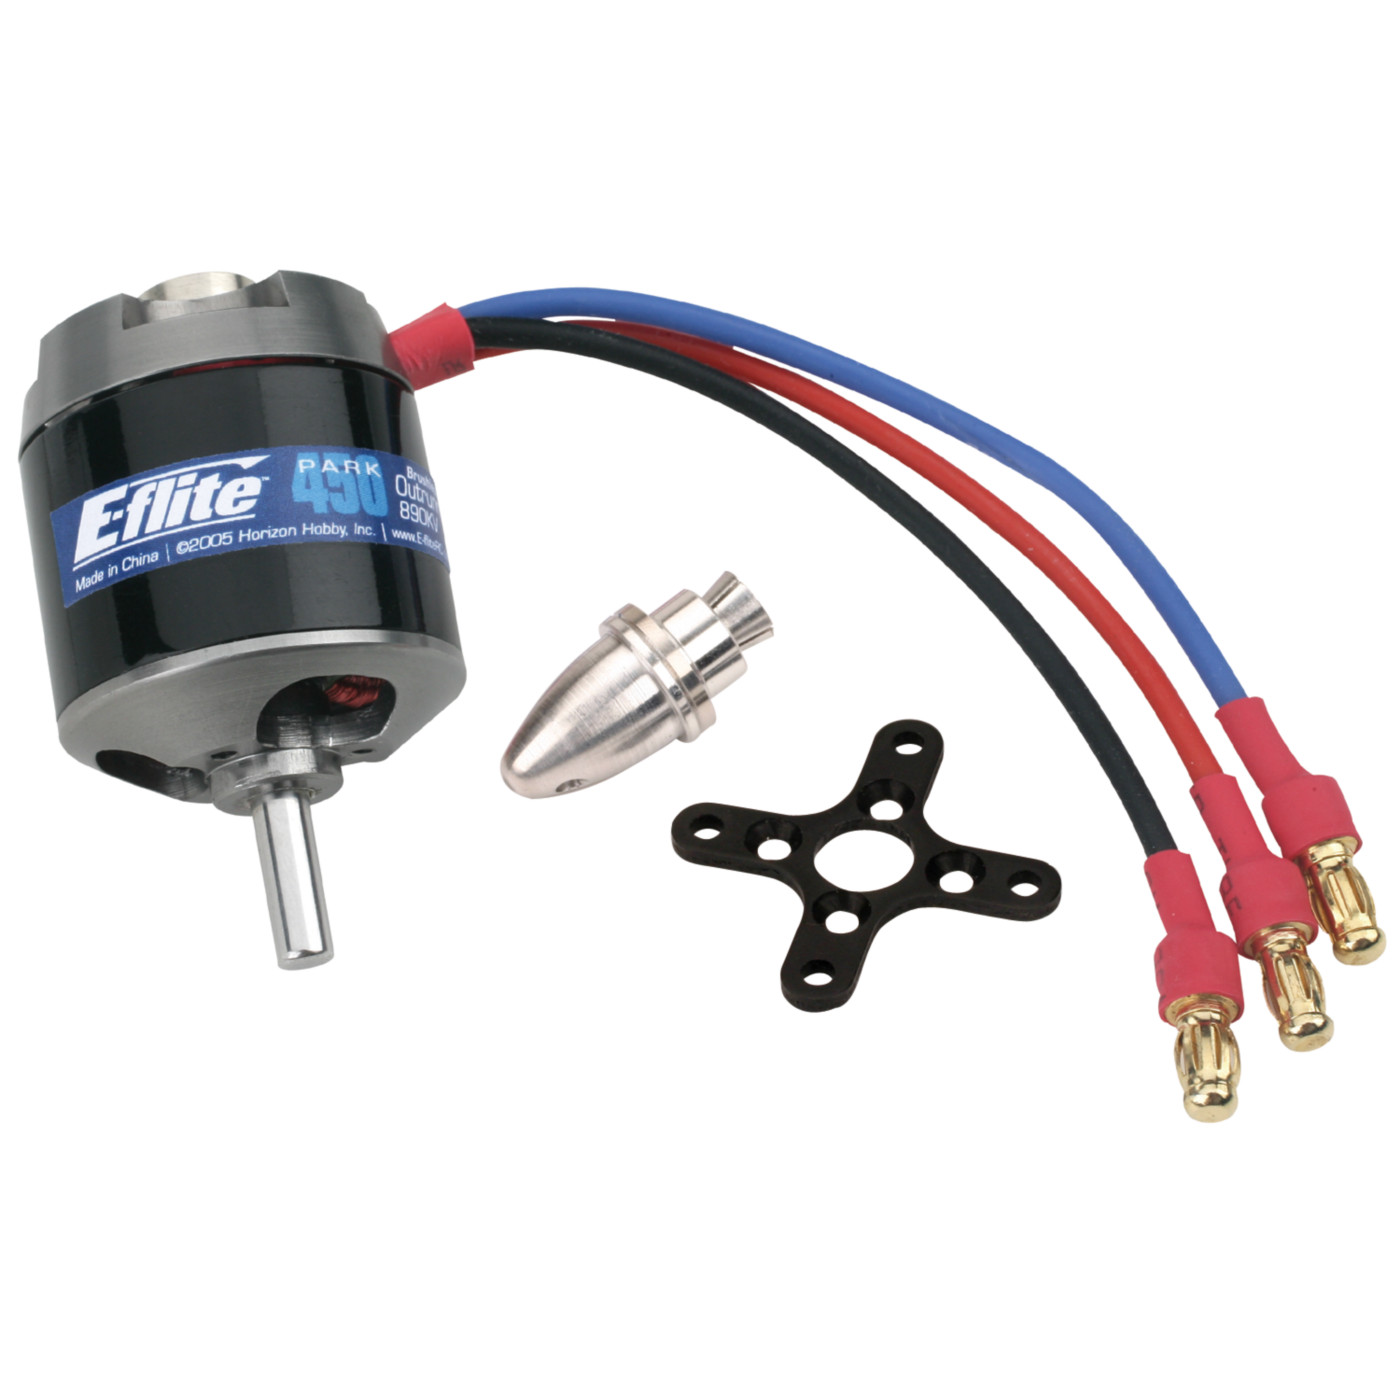 9T 5045 890KV Brushless Motor for Airpalne Aircraft Multicopters RC Plane